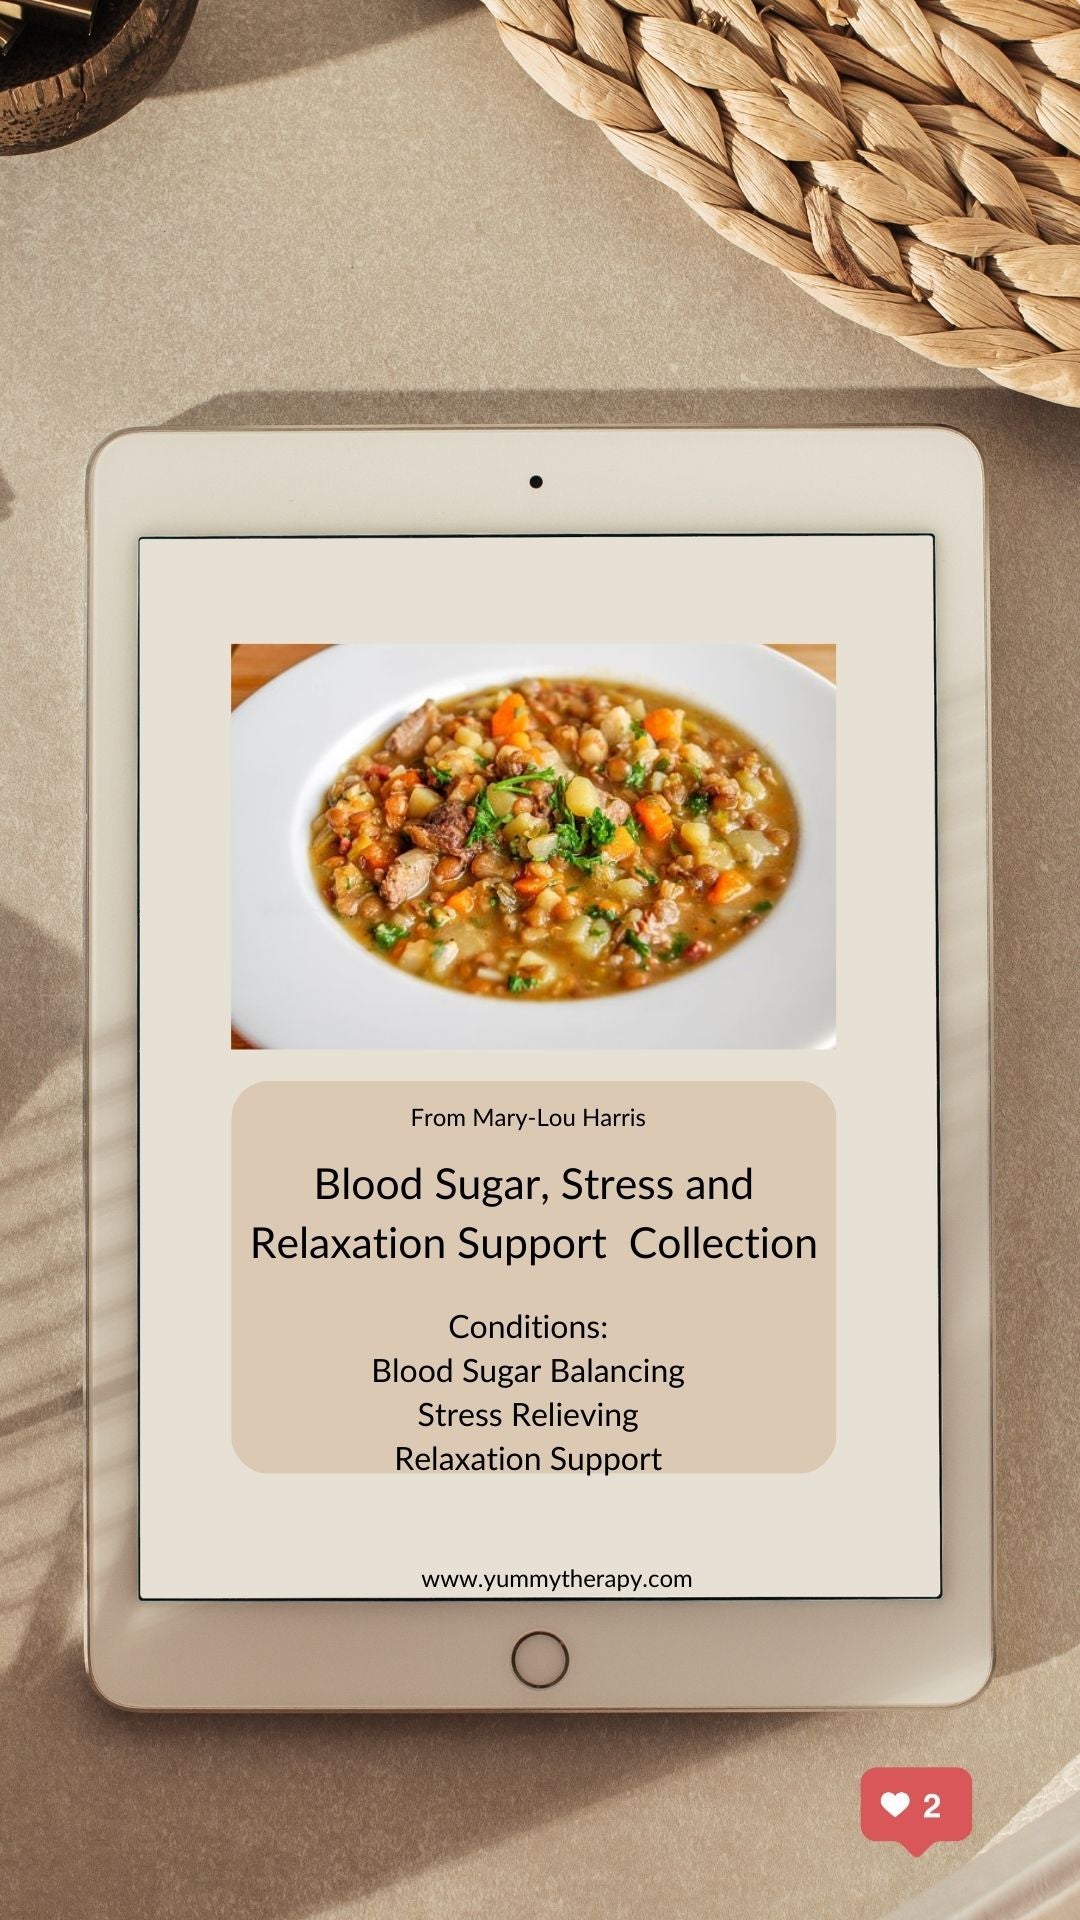 Blood Sugars, Stress & Relaxation Support Recipes eBook